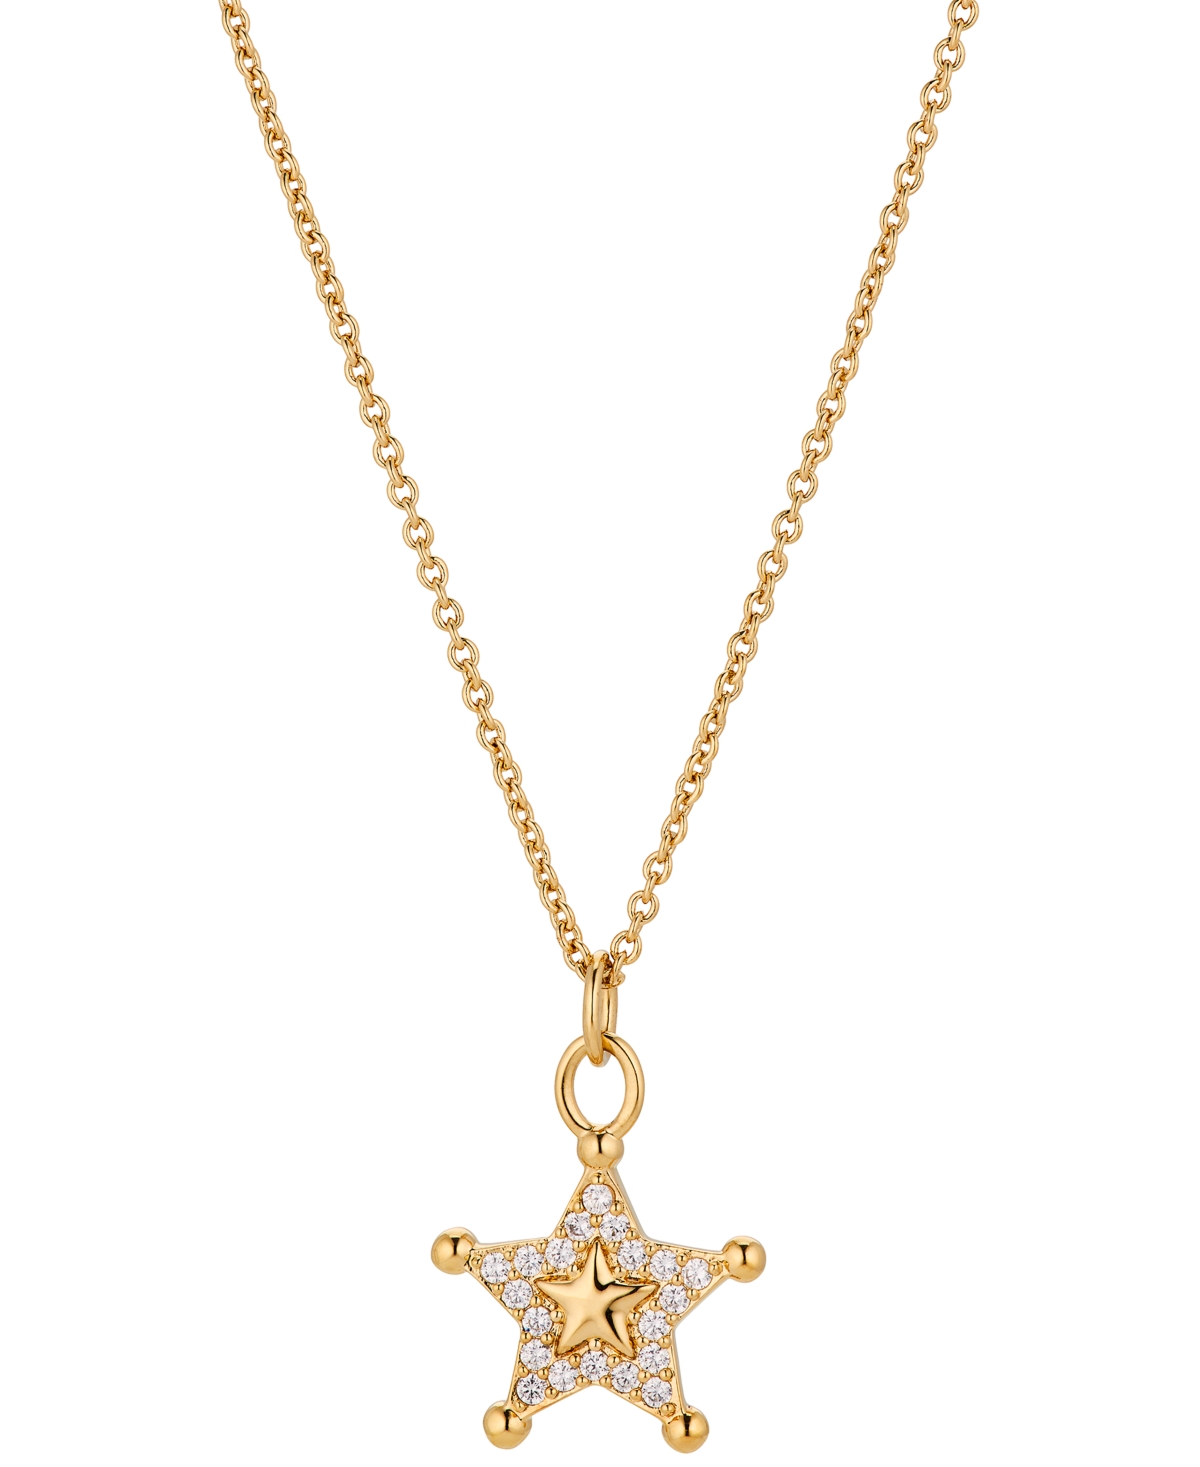 Shop Ajoa By Nadri 18k Gold-plated Pave Sheriff Star Pendant Necklace, 16" + 2" Extender